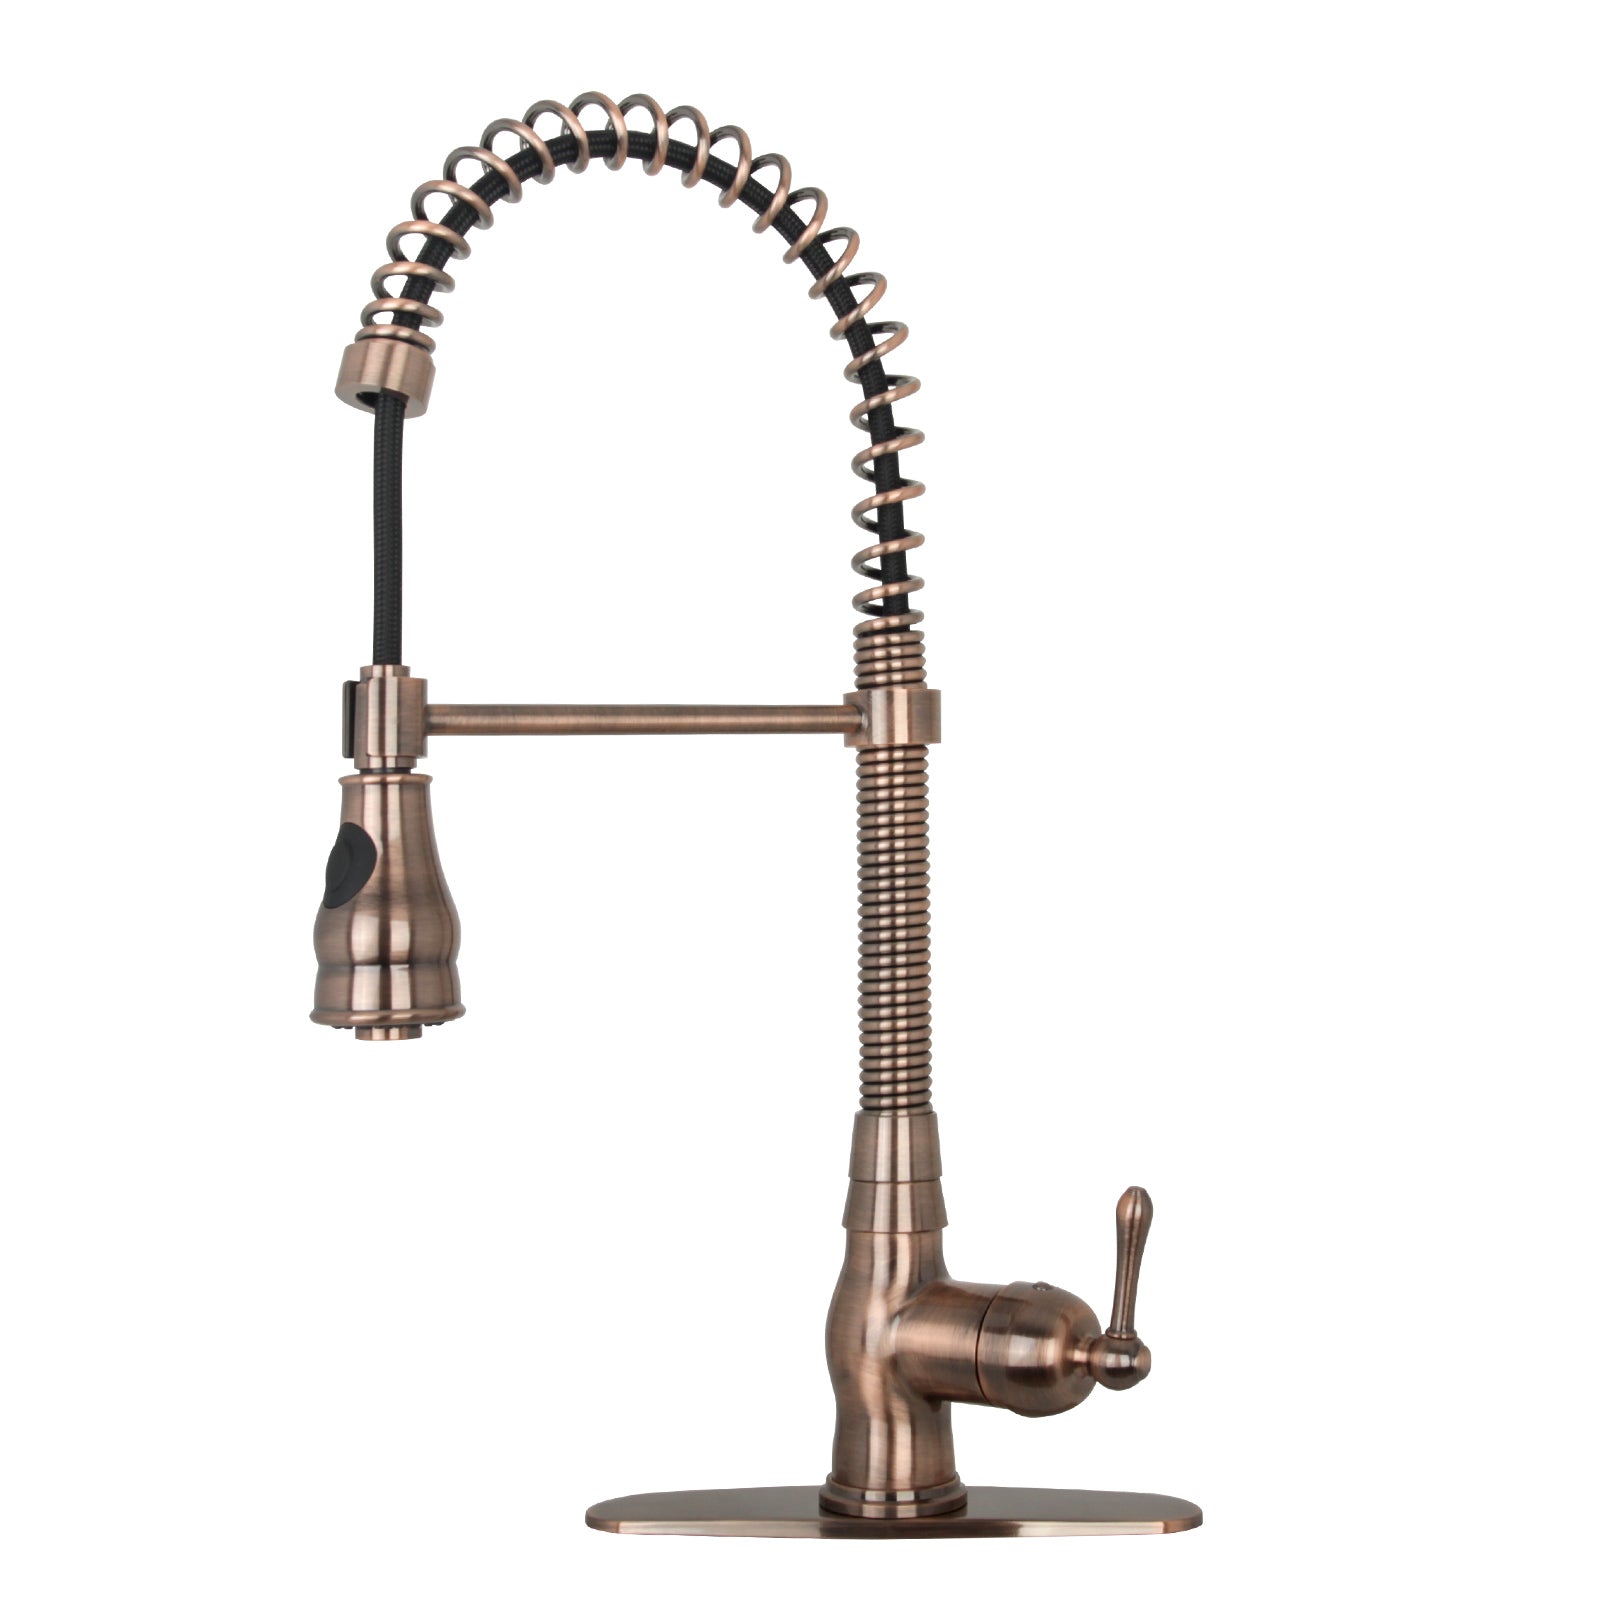 Antique Copper Pre-Rinse Spring Kitchen Faucet, Single Level Solid Brass Kitchen Sink Faucets with Pull Down Sprayer - AK96518A-AC